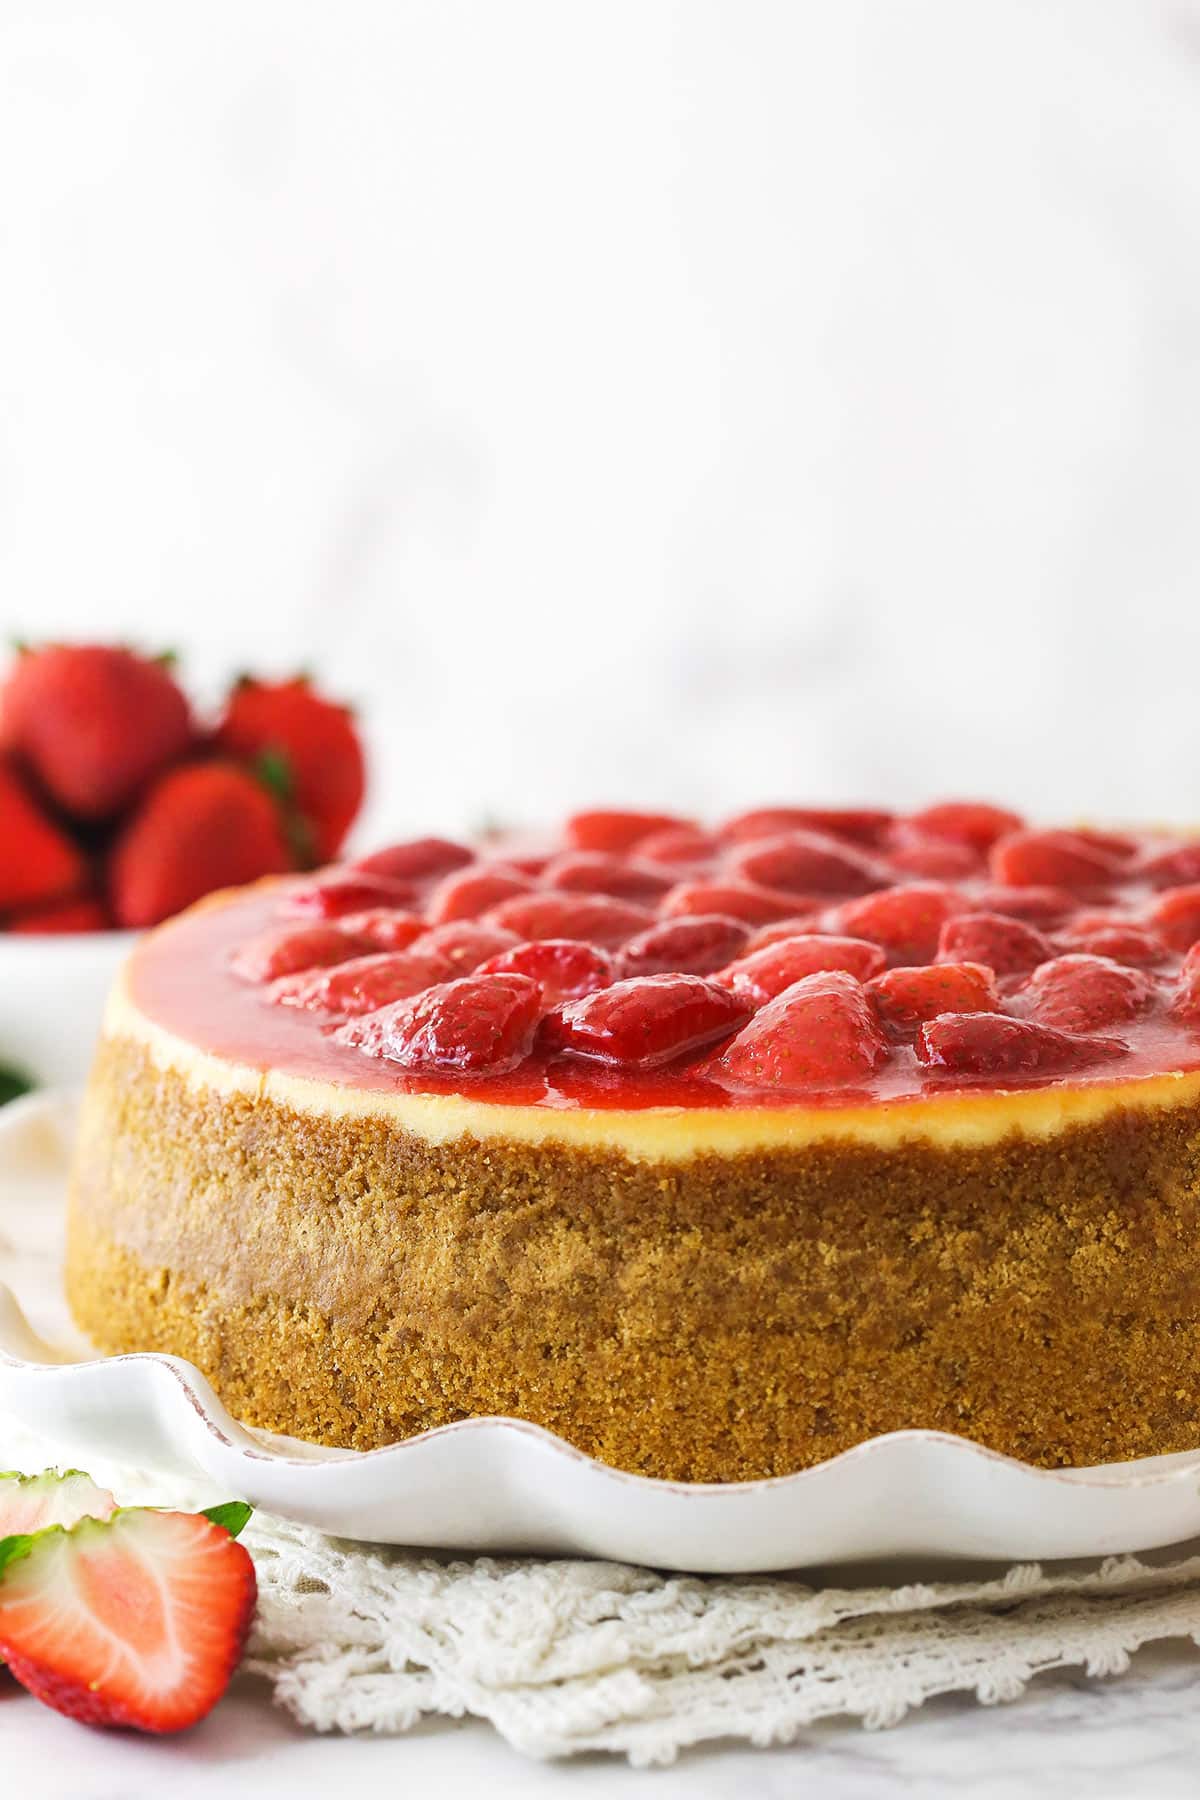 Strawberry cheesecake on a serving platter near a bowl of fresh strawberries.